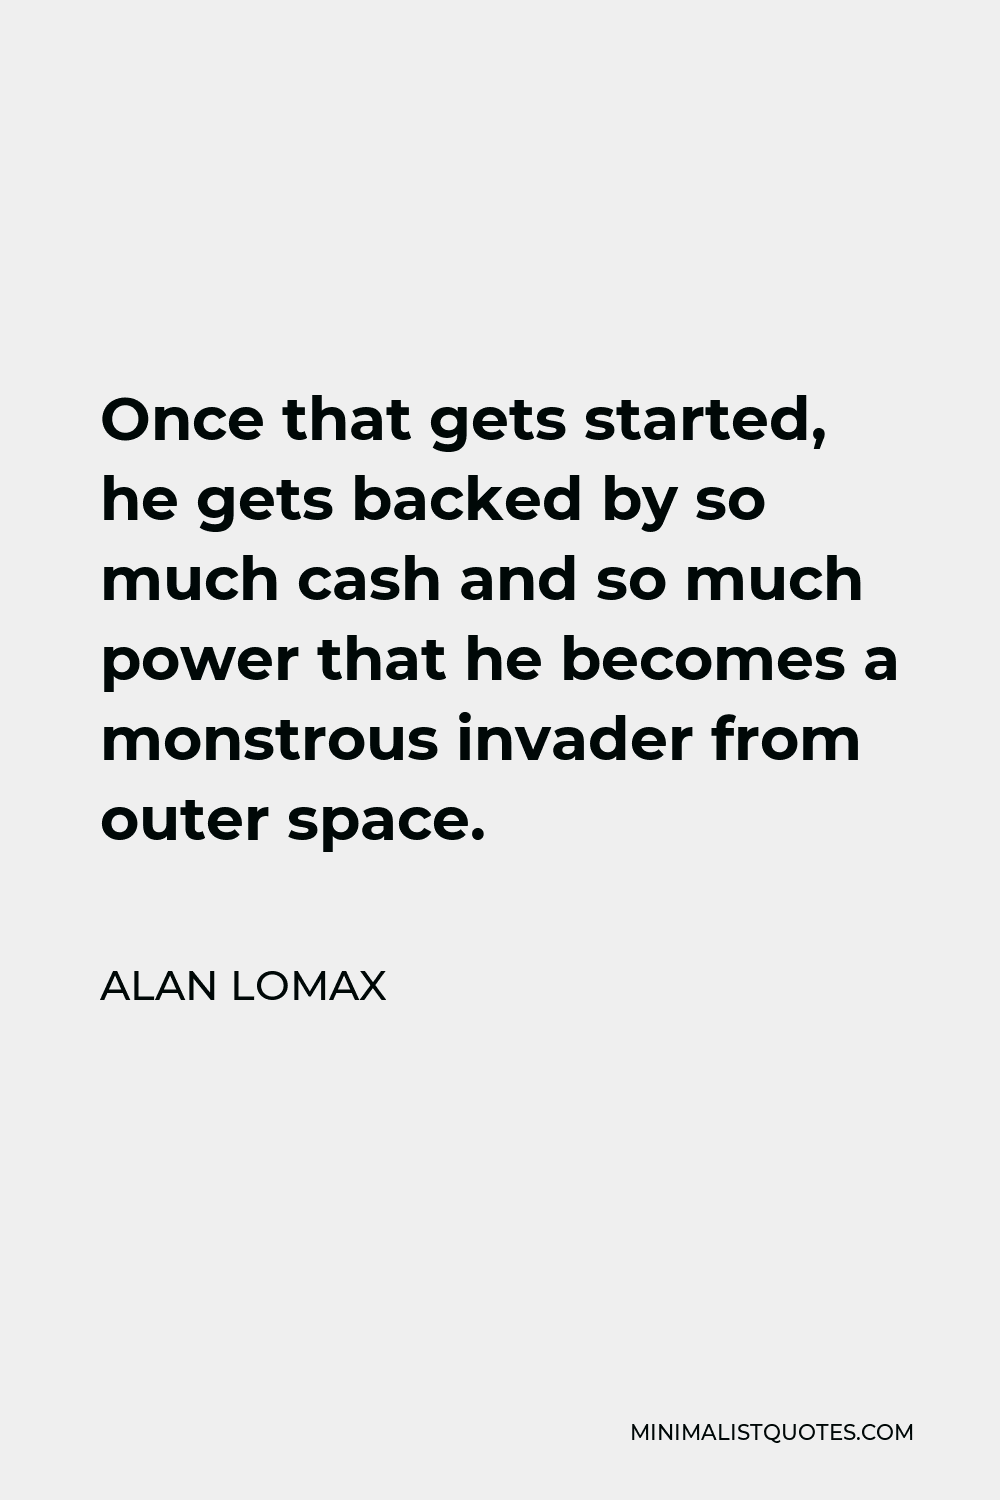 Alan Lomax Quote - Once that gets started, he gets backed by so much cash and so much power that he becomes a monstrous invader from outer space.